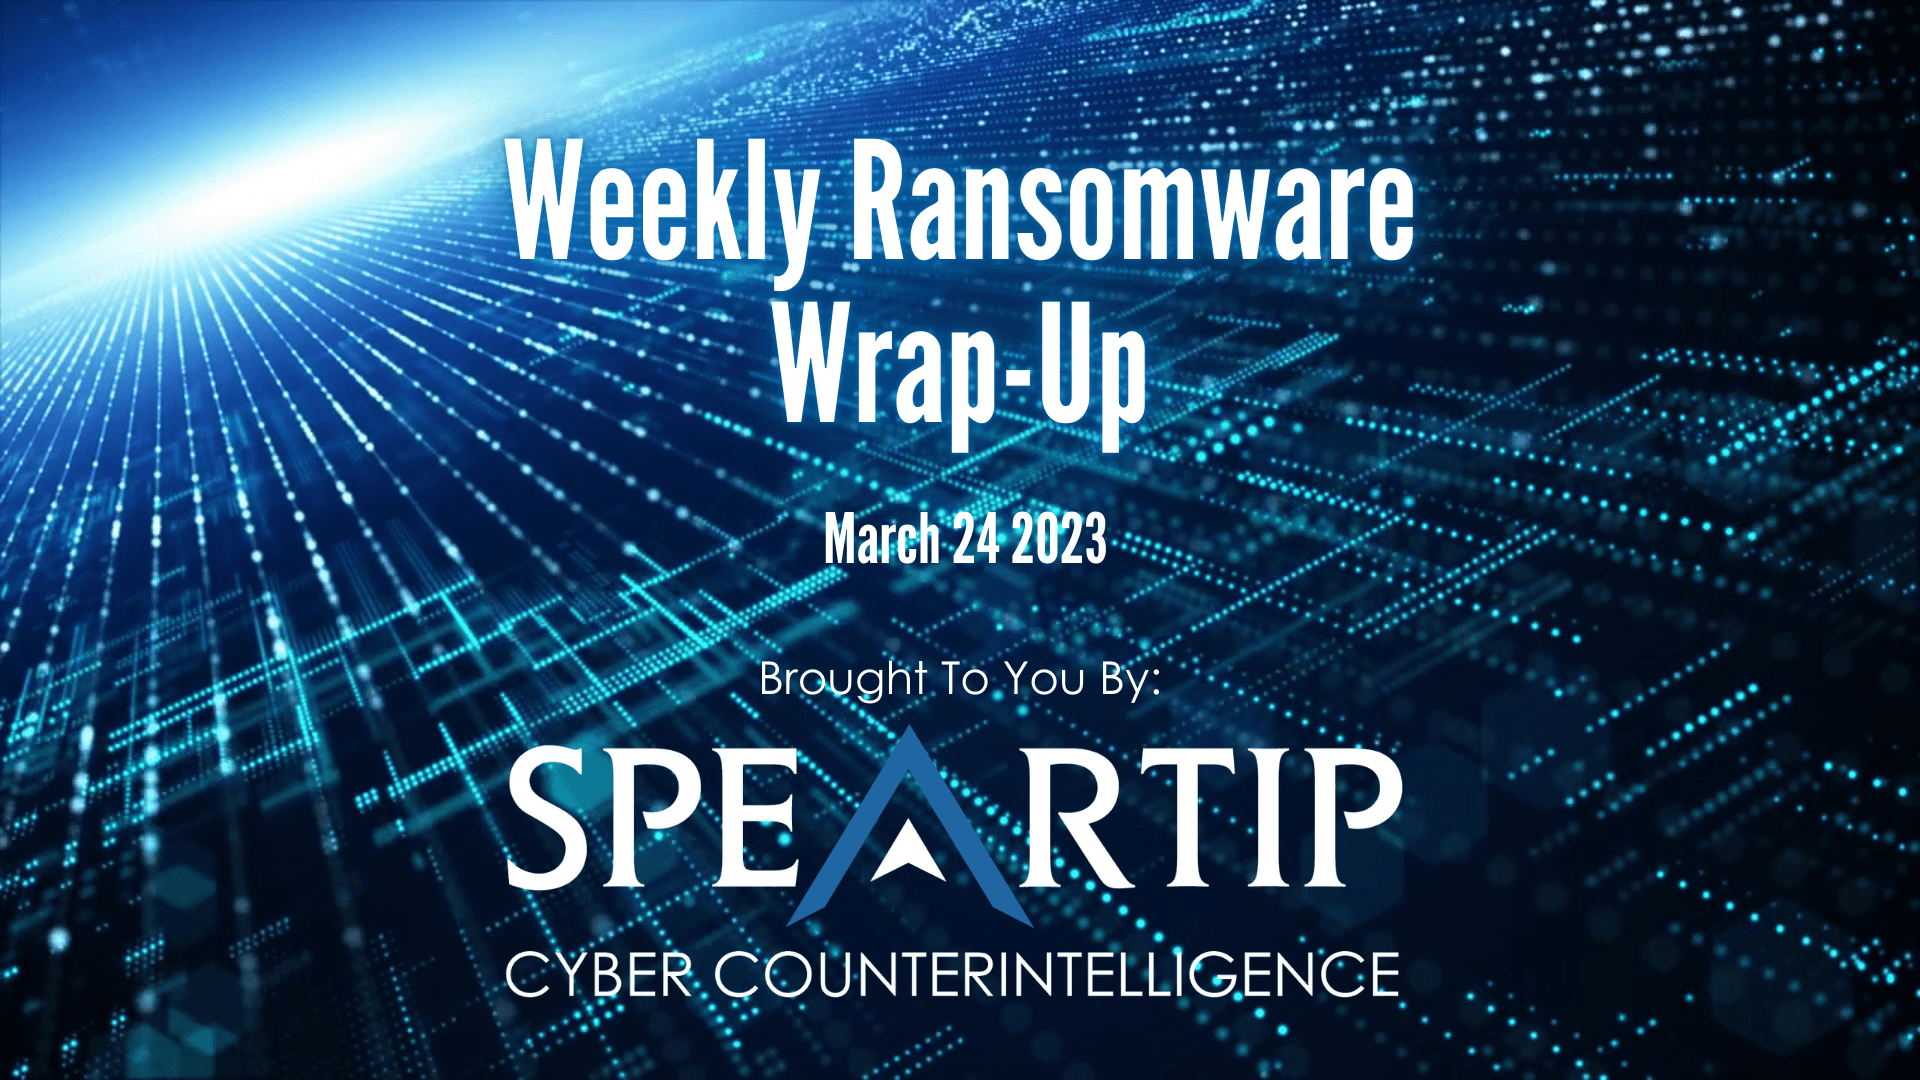 March 24, 2023 Ransomware Wrap-Up